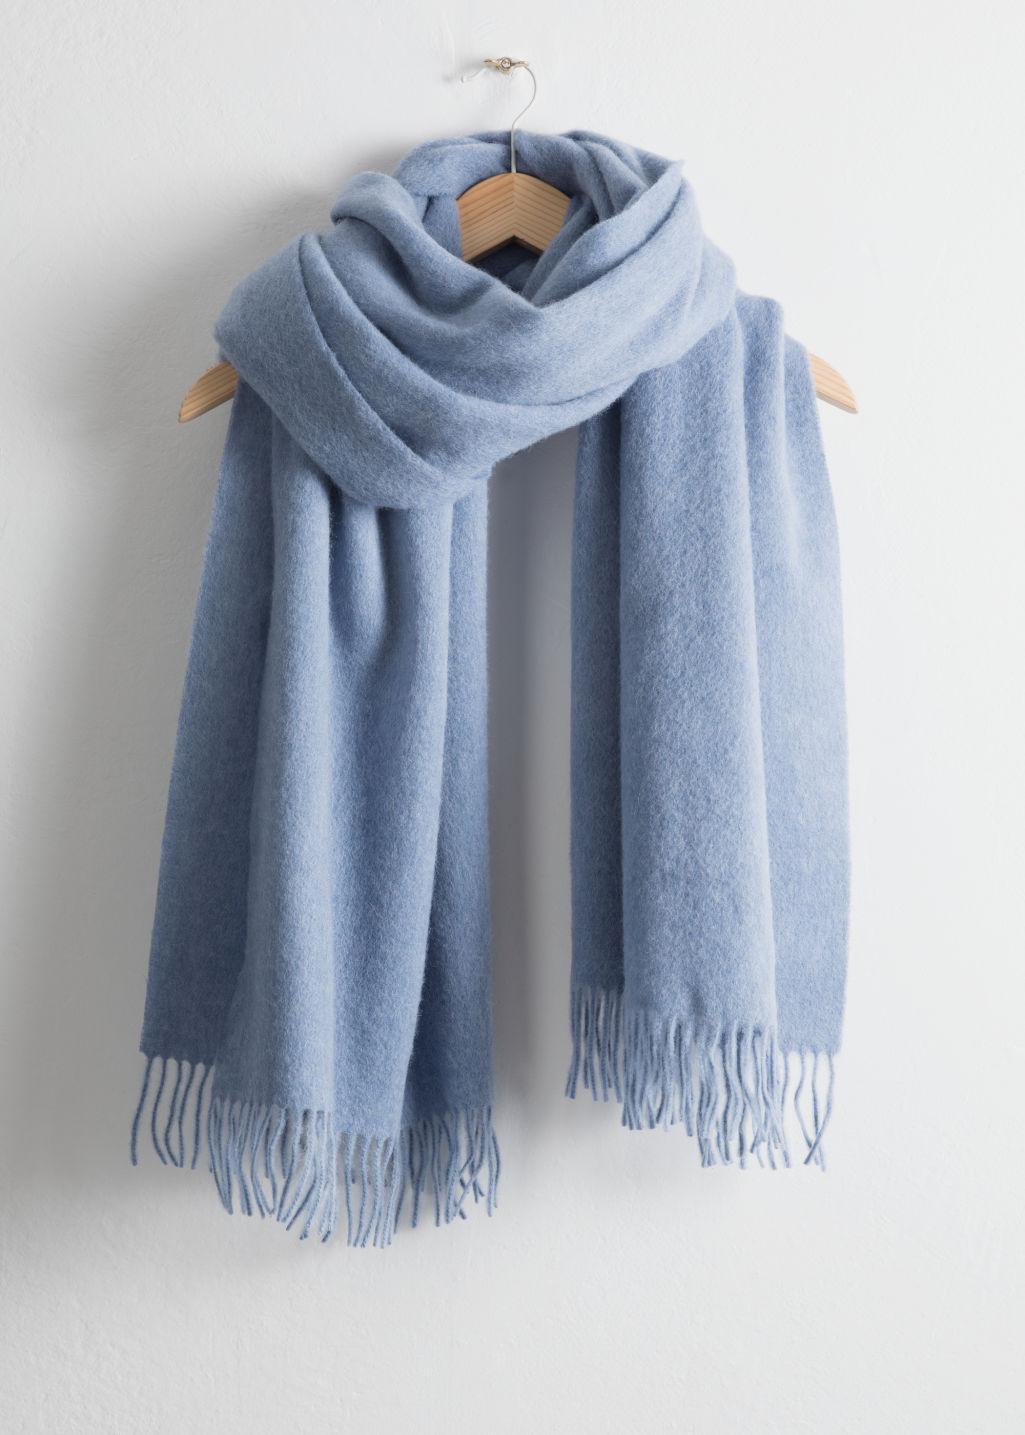  Other Stories Oversized Wool Scarf in Blue